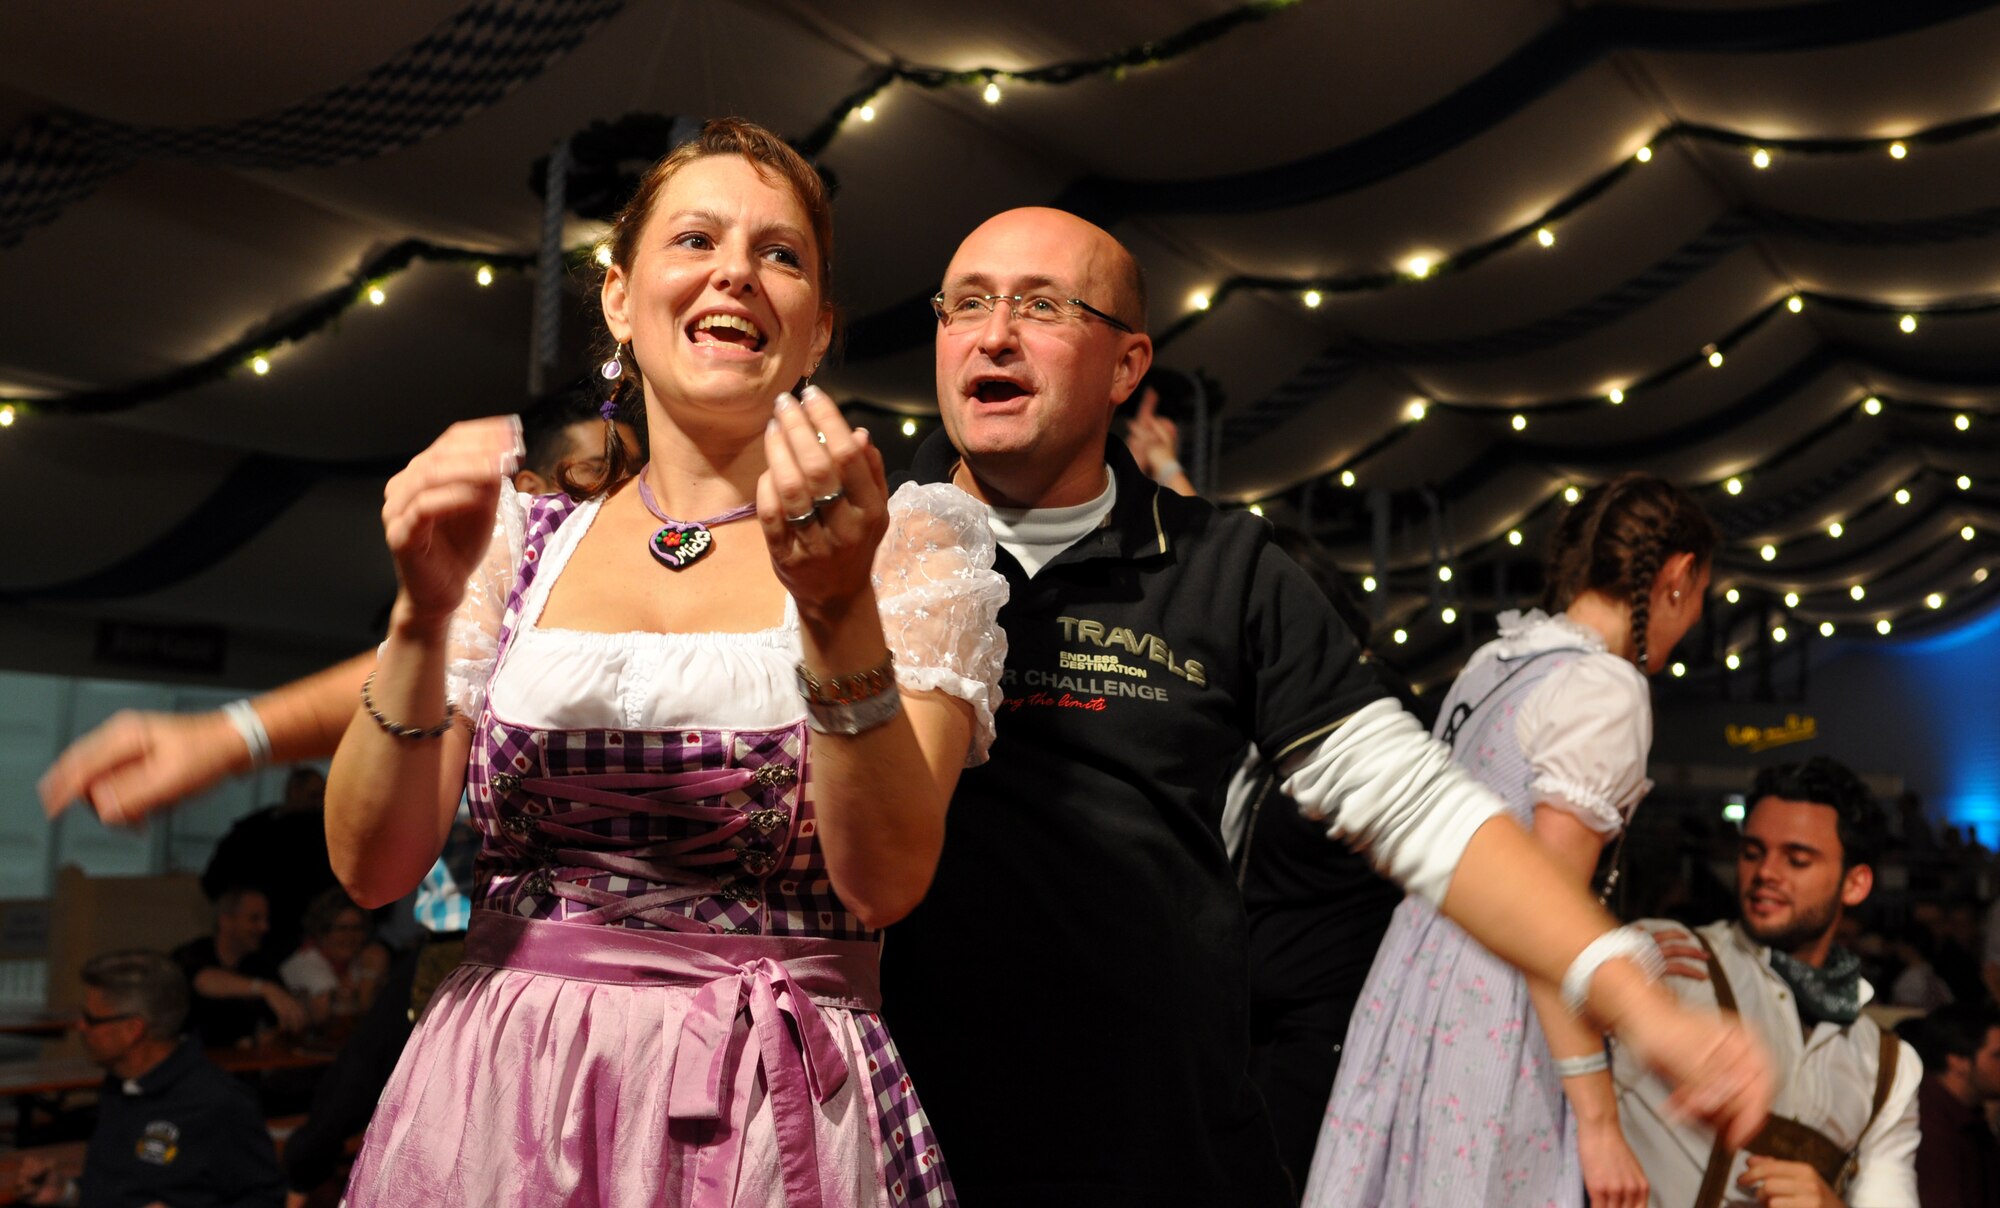 Festival visitors enjoy singing and cheering to music at a past October festival in Wittlich. Photo by Iris Reiff 
